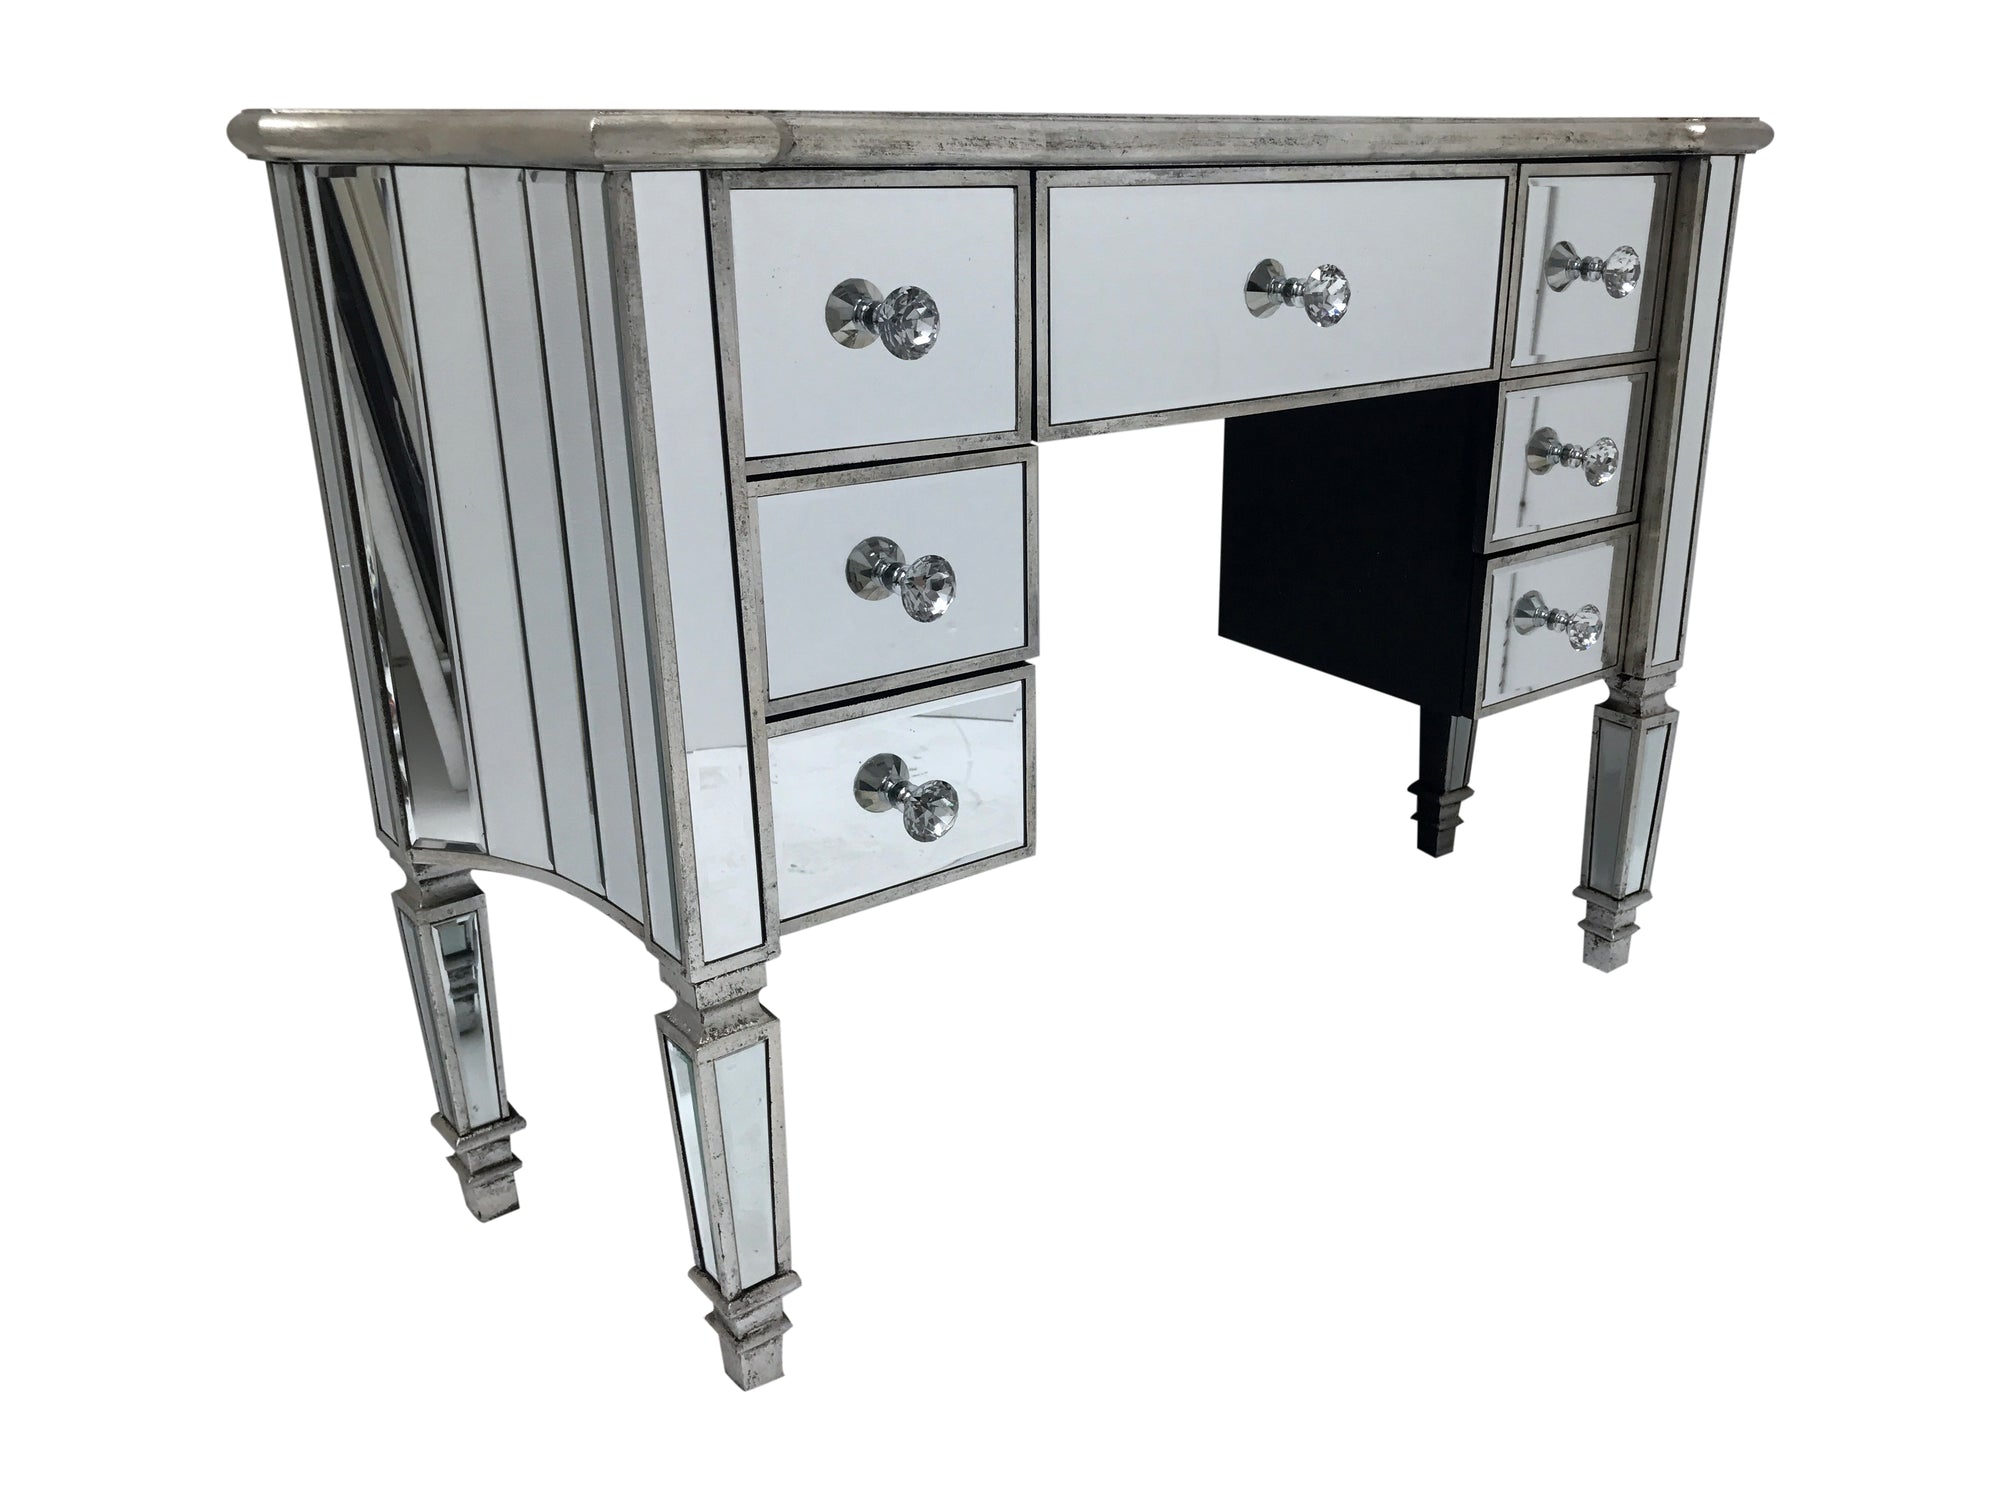 Mirrored dressing table with seven drawers, front view